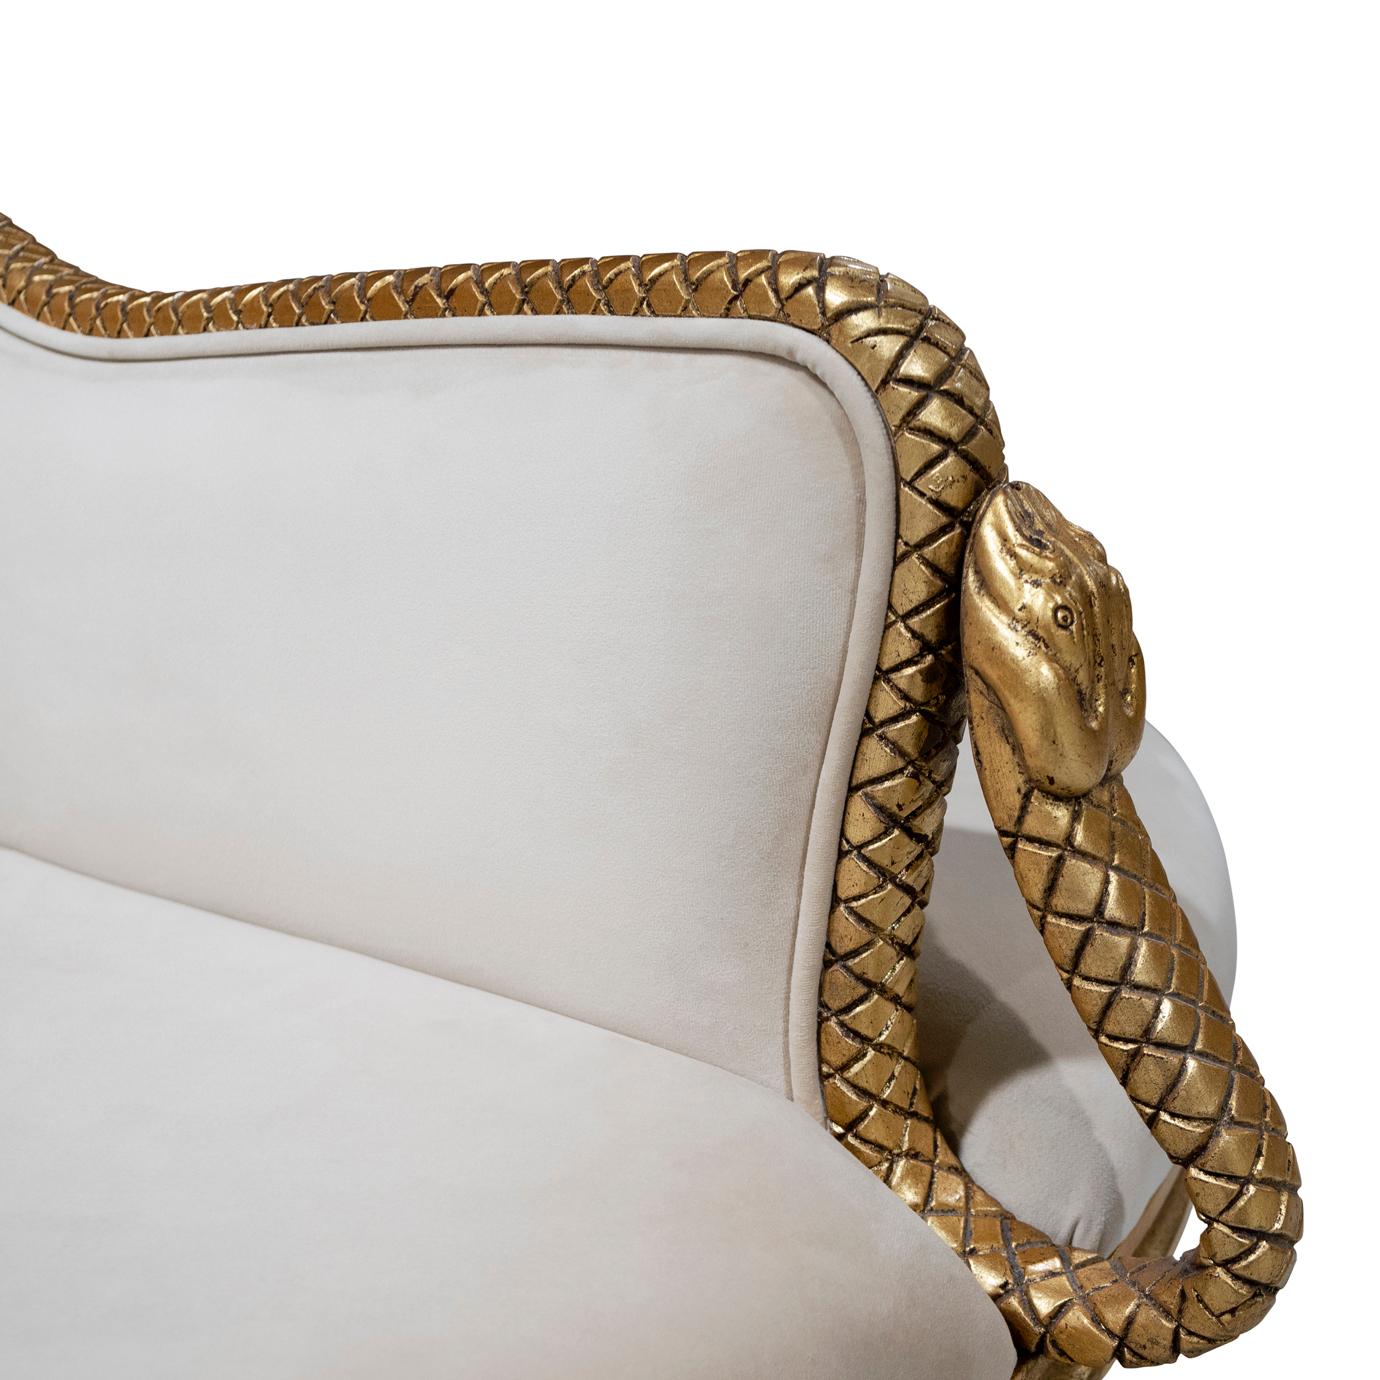 Menacing and mesmerizing hand-carved serpents embody an exotic, untouchable yet sensual aura giving the Mistress confidante the power to capture and seduce in every way.